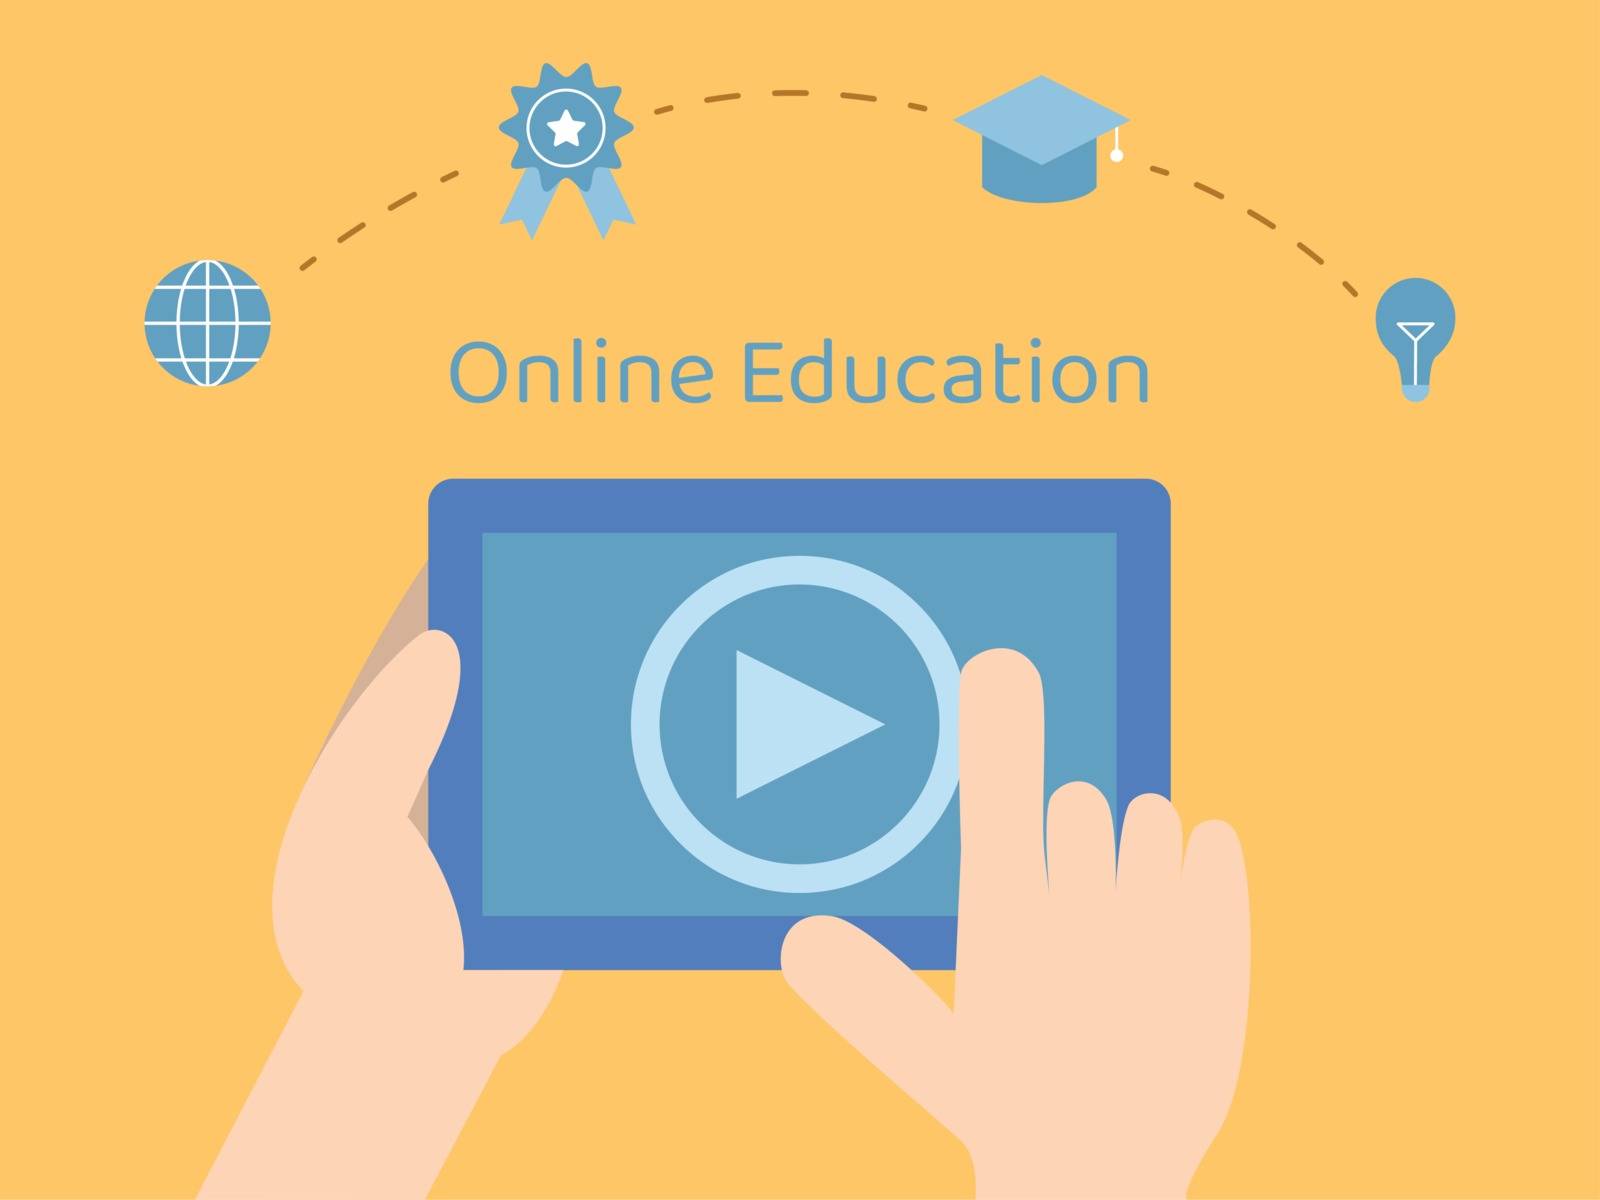 Online course in tablet. Illustration about E-learning and Onlin by doraclub